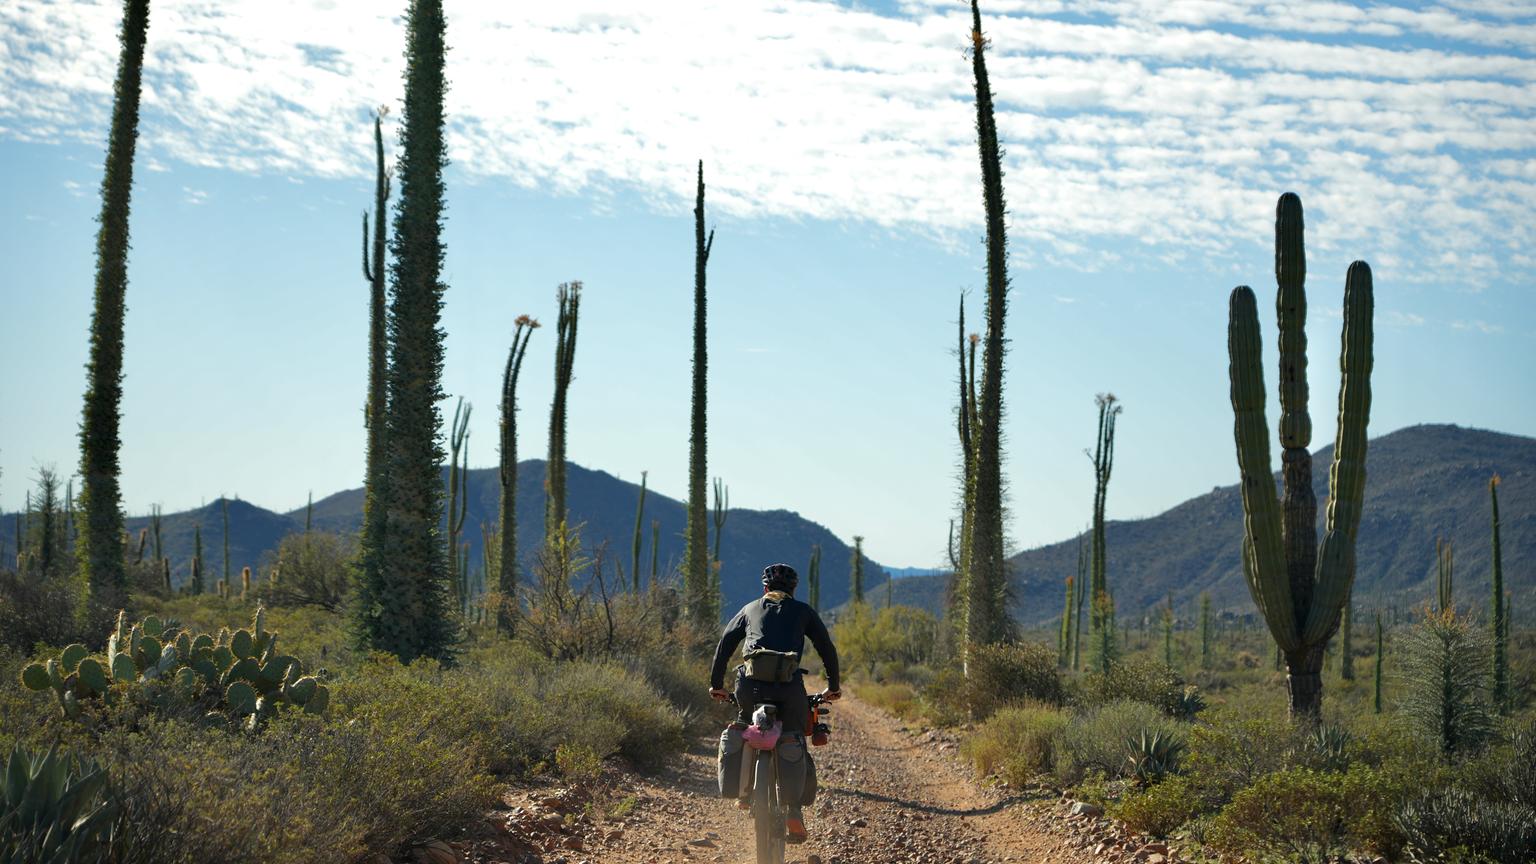 Images Shot on VND Filters | Bike Packing Along the Baja w/ My Favorite Camera Filters